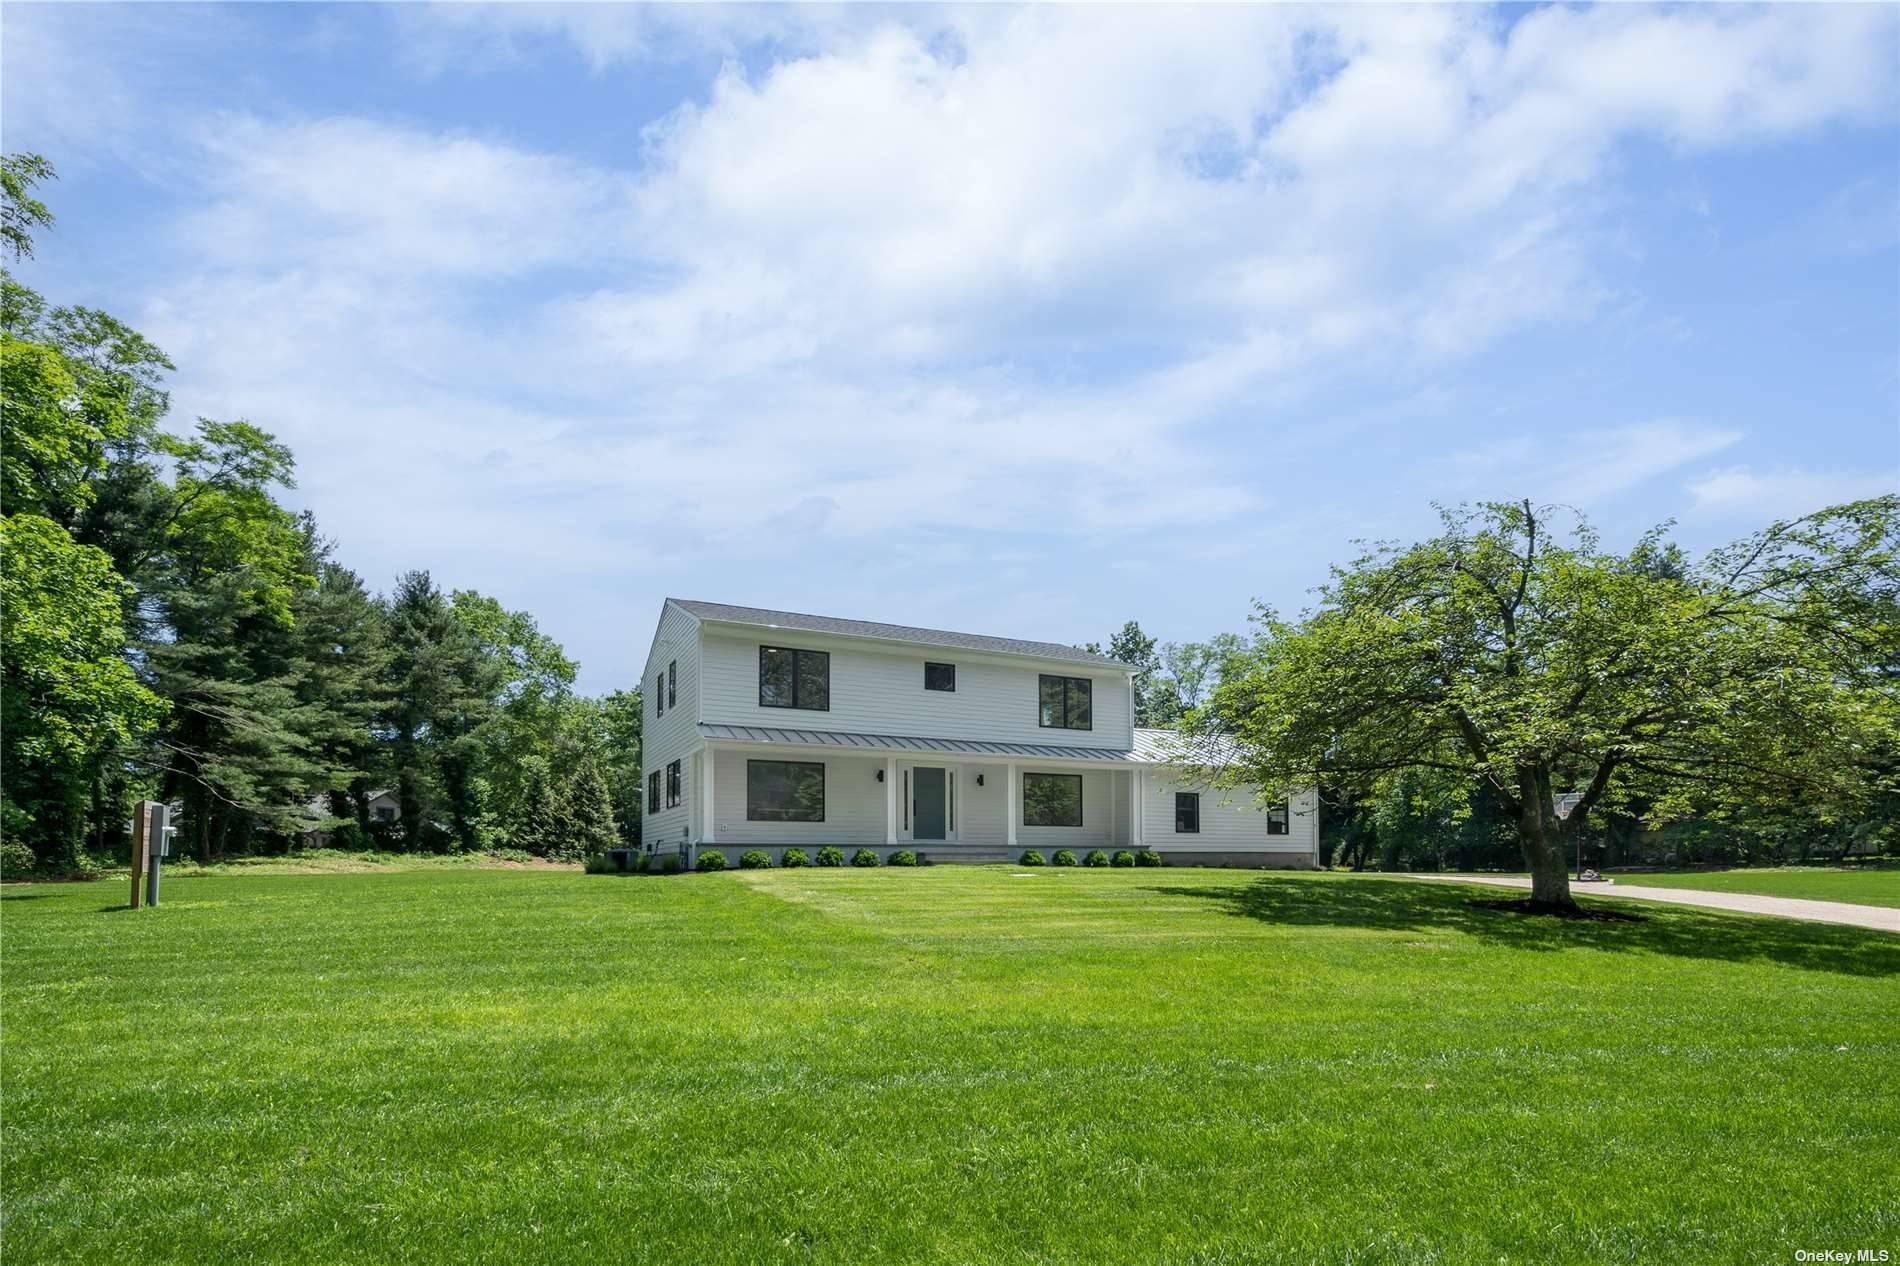 4 Saw Mill Road in Long Island, Cold Spring Hrbr, NY 11724